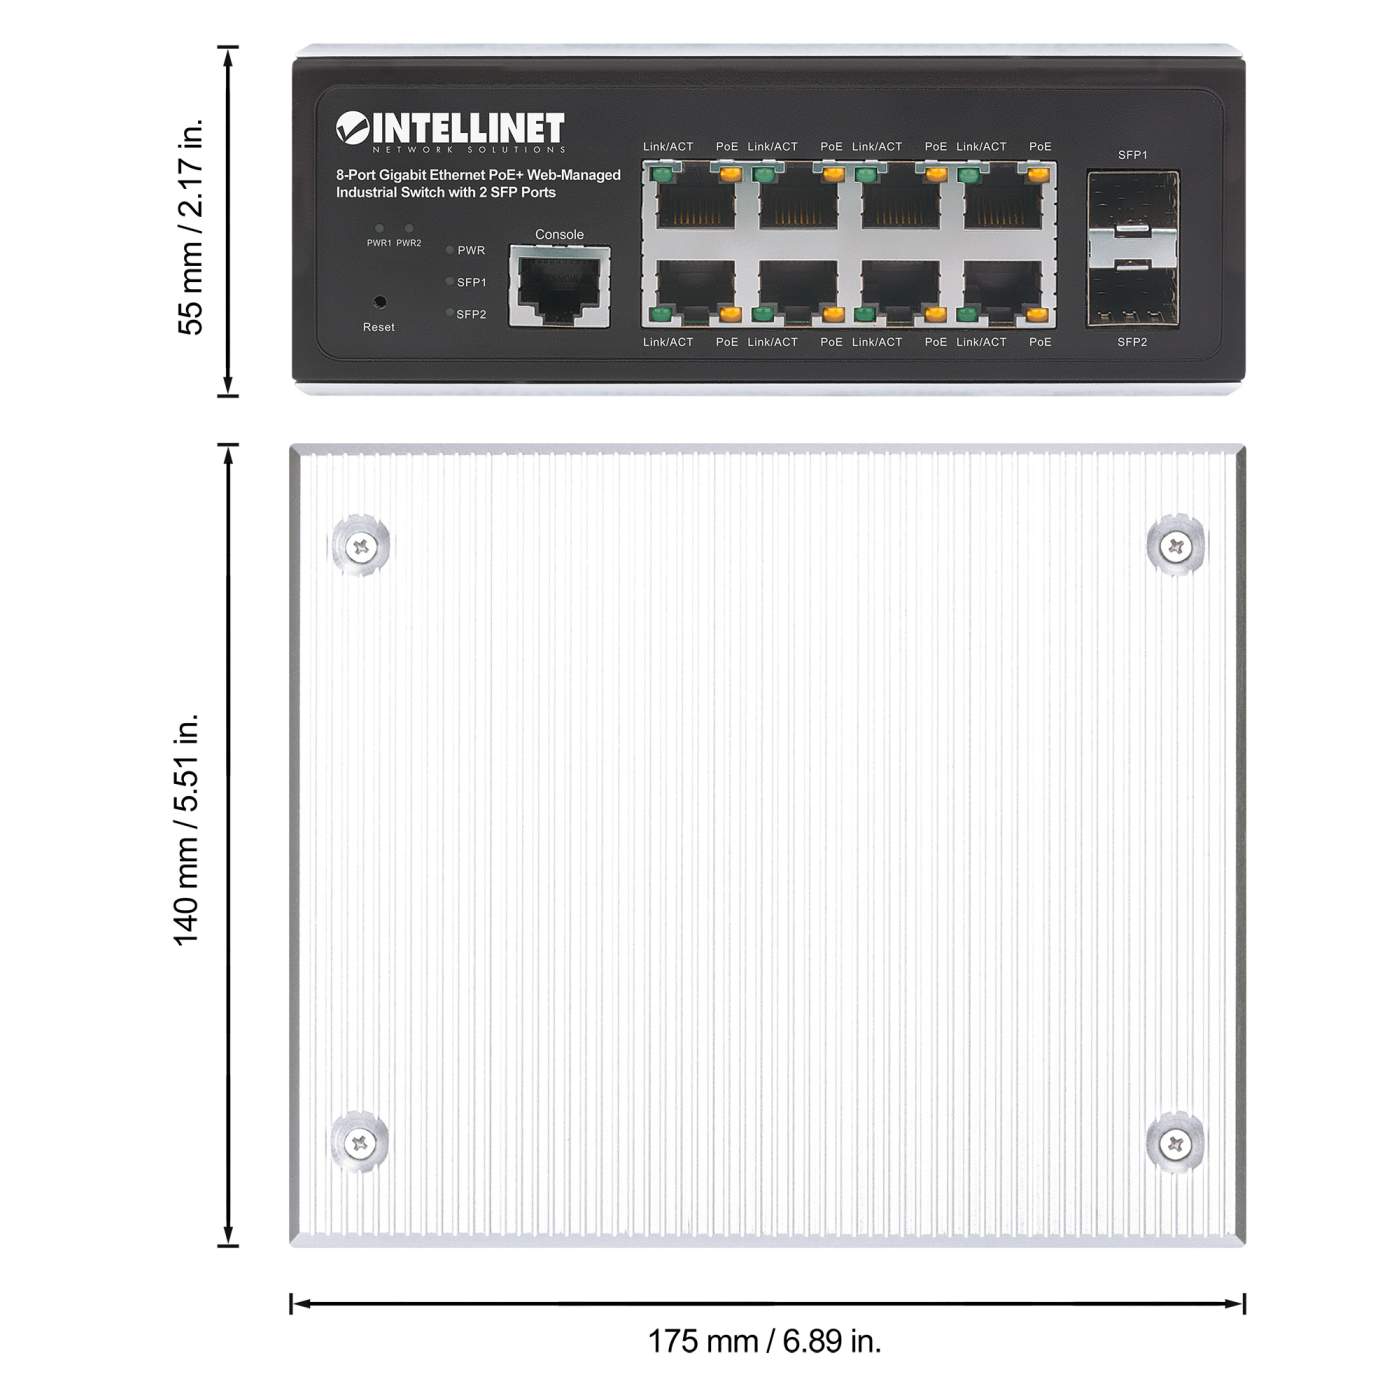 Industrial 8-Port Gigabit Ethernet PoE+ Layer 2+ Web-Managed Switch with 2 SFP Ports Image 6